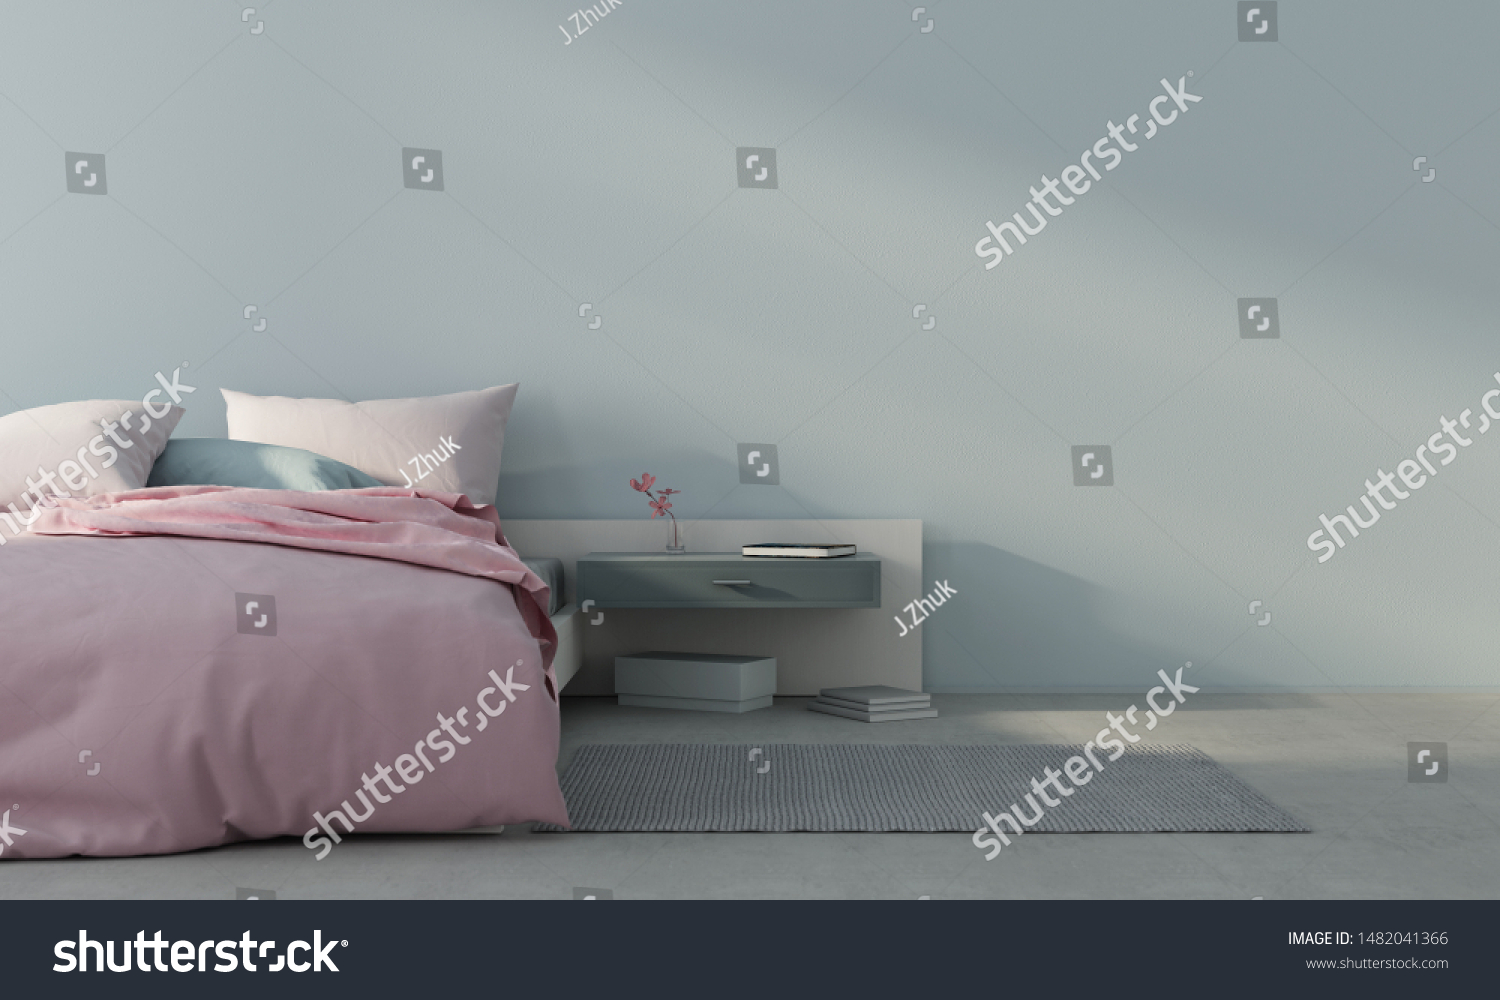 Minimalism style bedroom interior with pink bed against a light blue wall  / 3D illustration3d render #1482041366